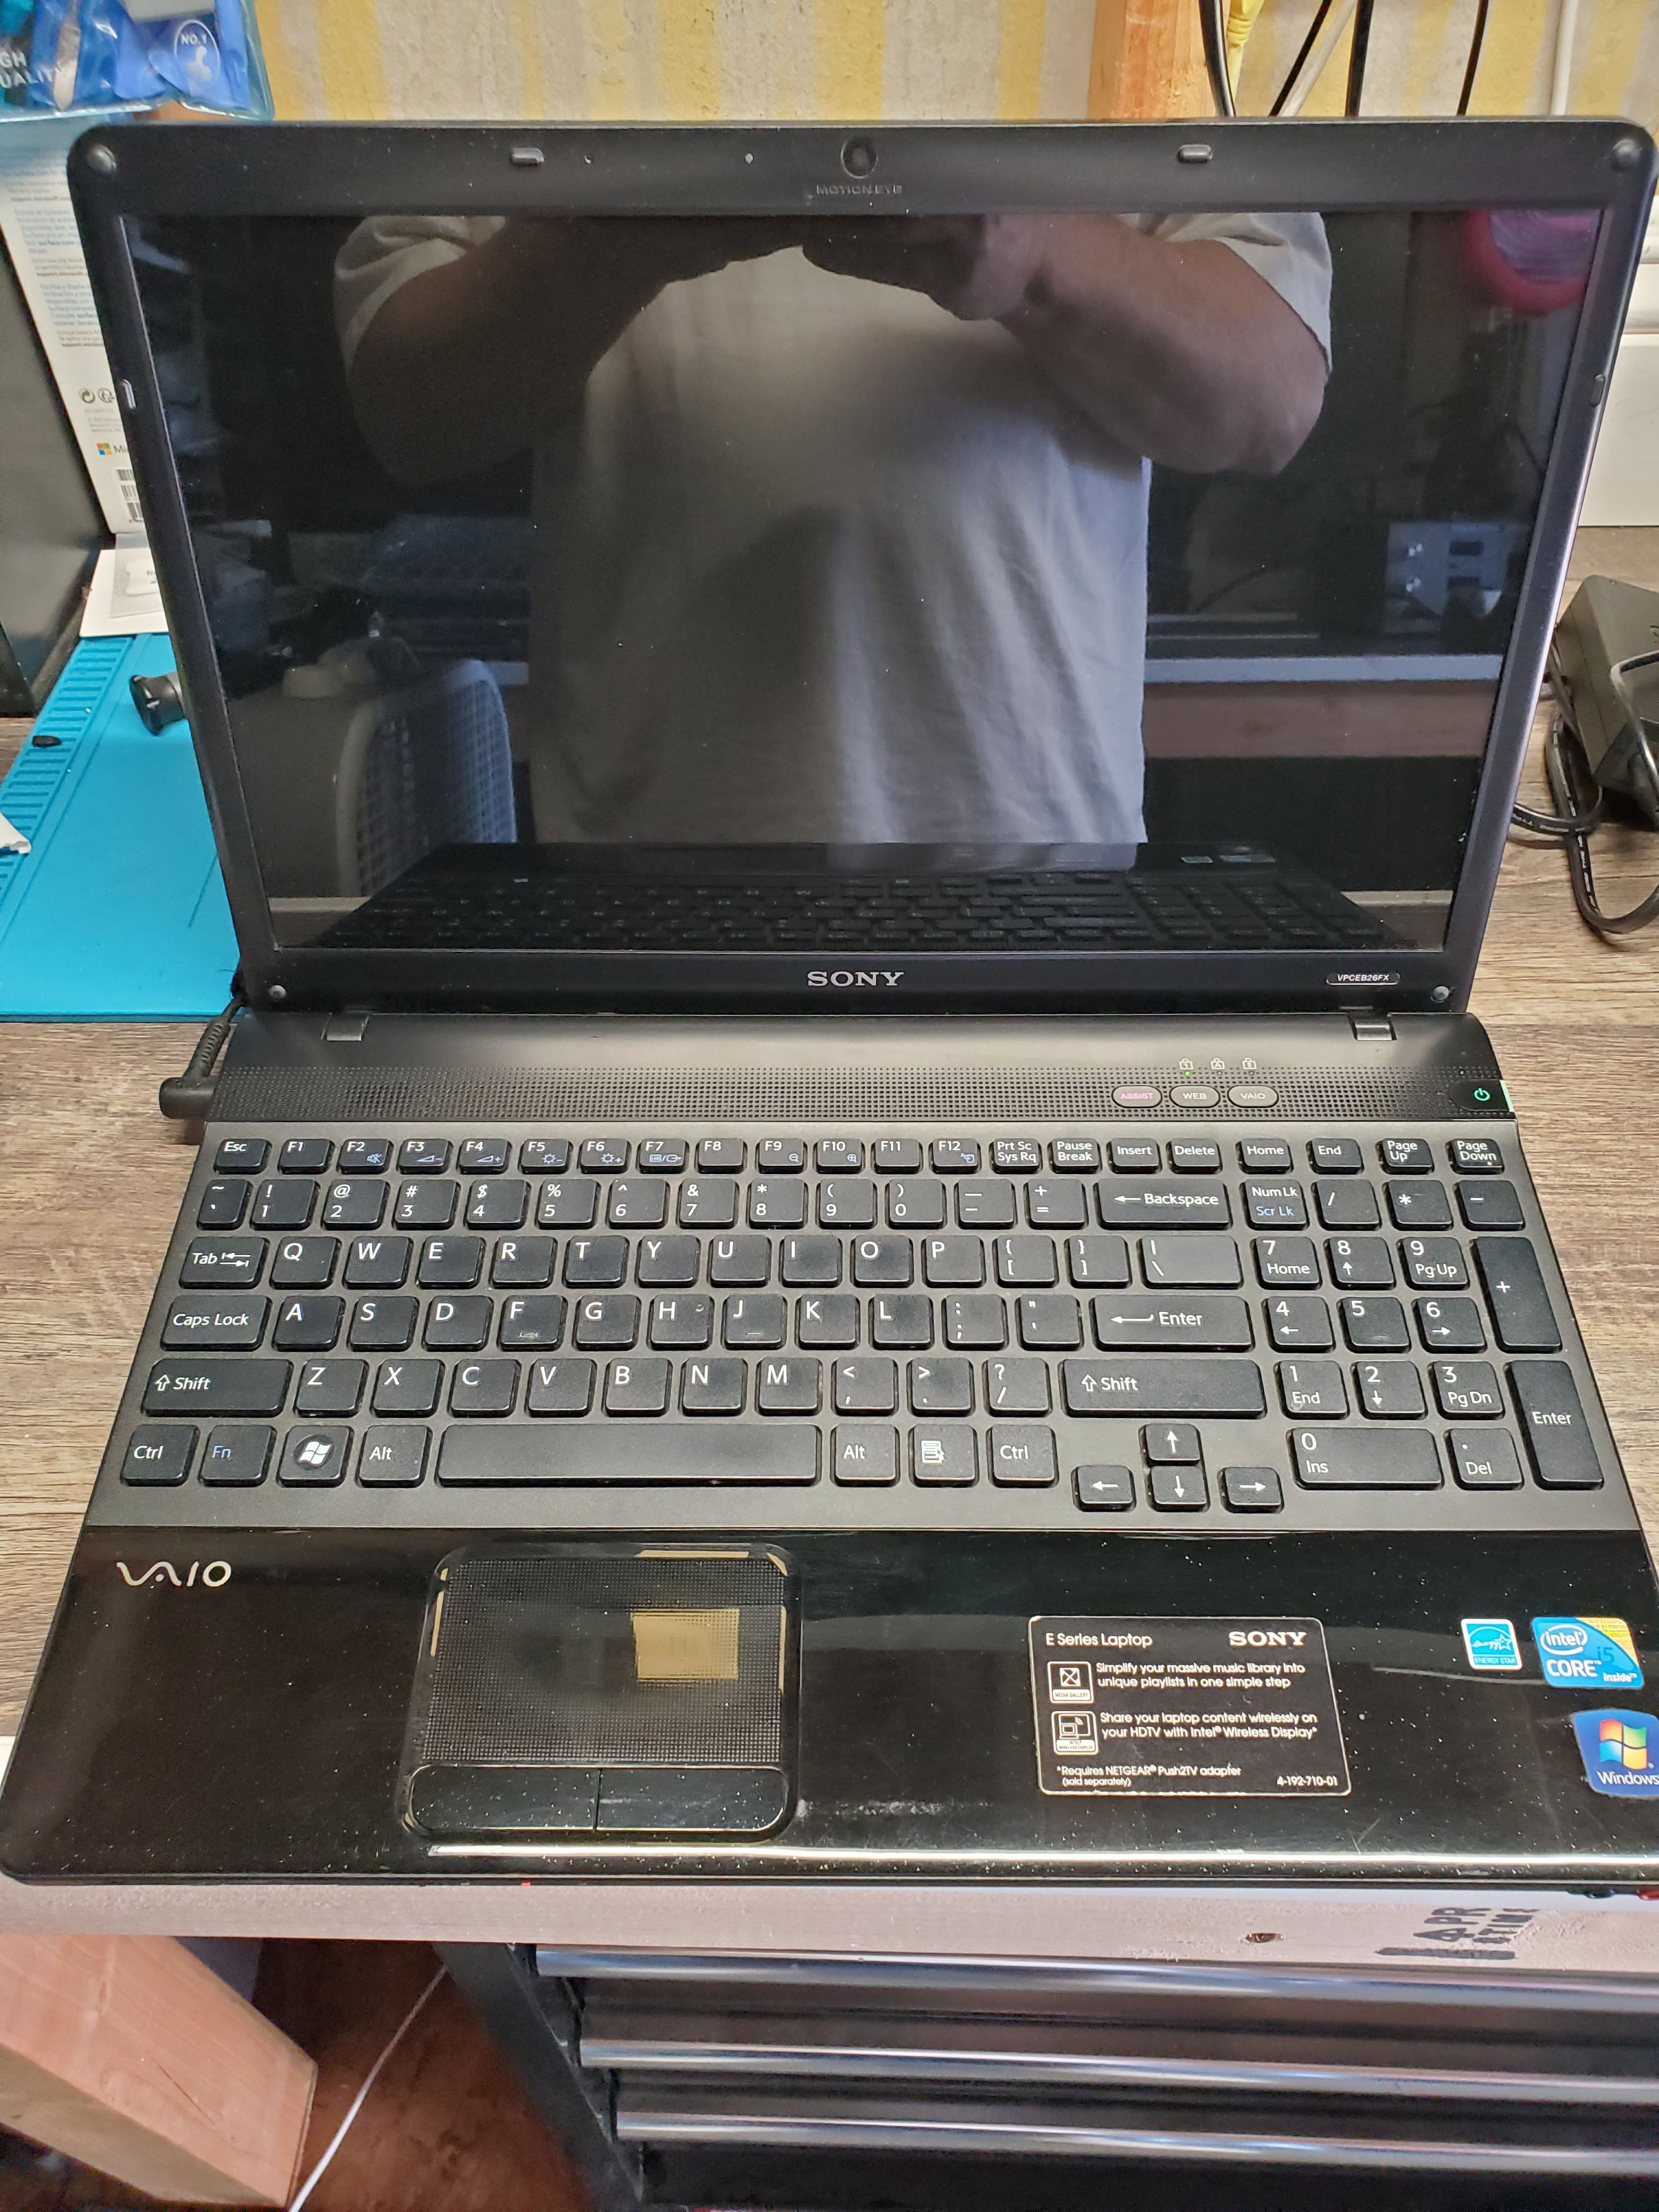 Sony Vaio 15" Widescreen Laptop with Intel i5